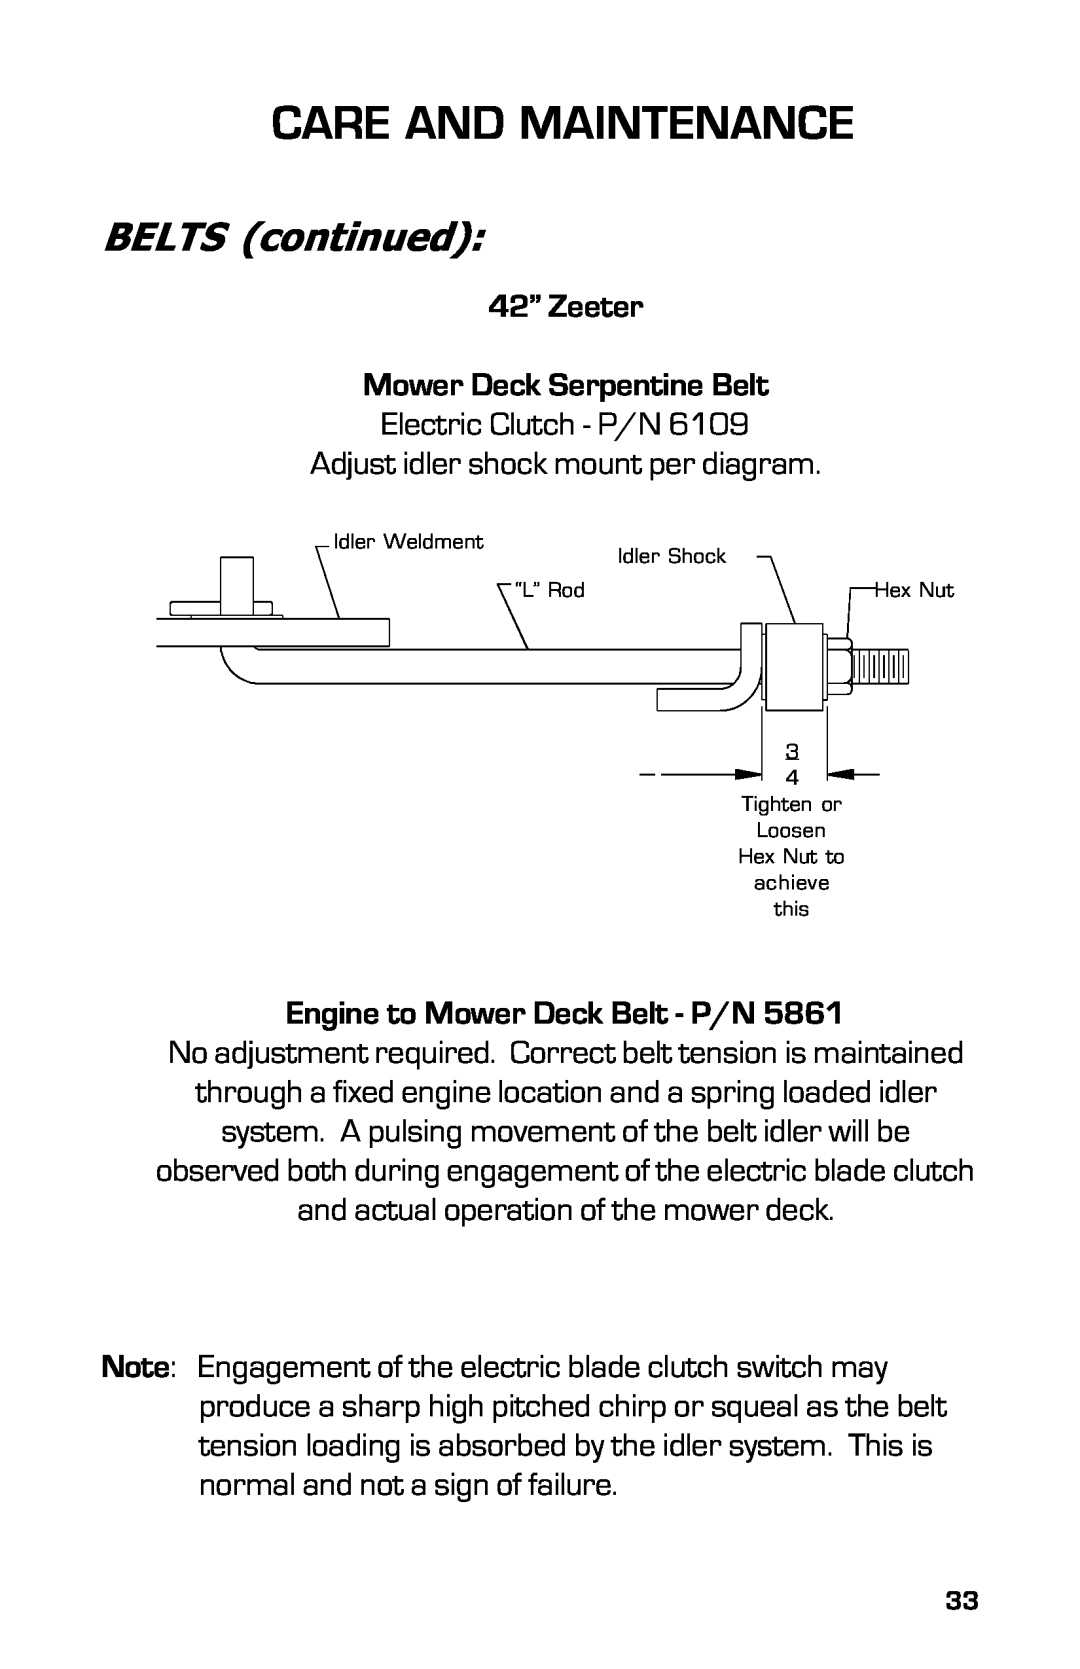 Dixon 2004 manual BELTS continued, Care And Maintenance 